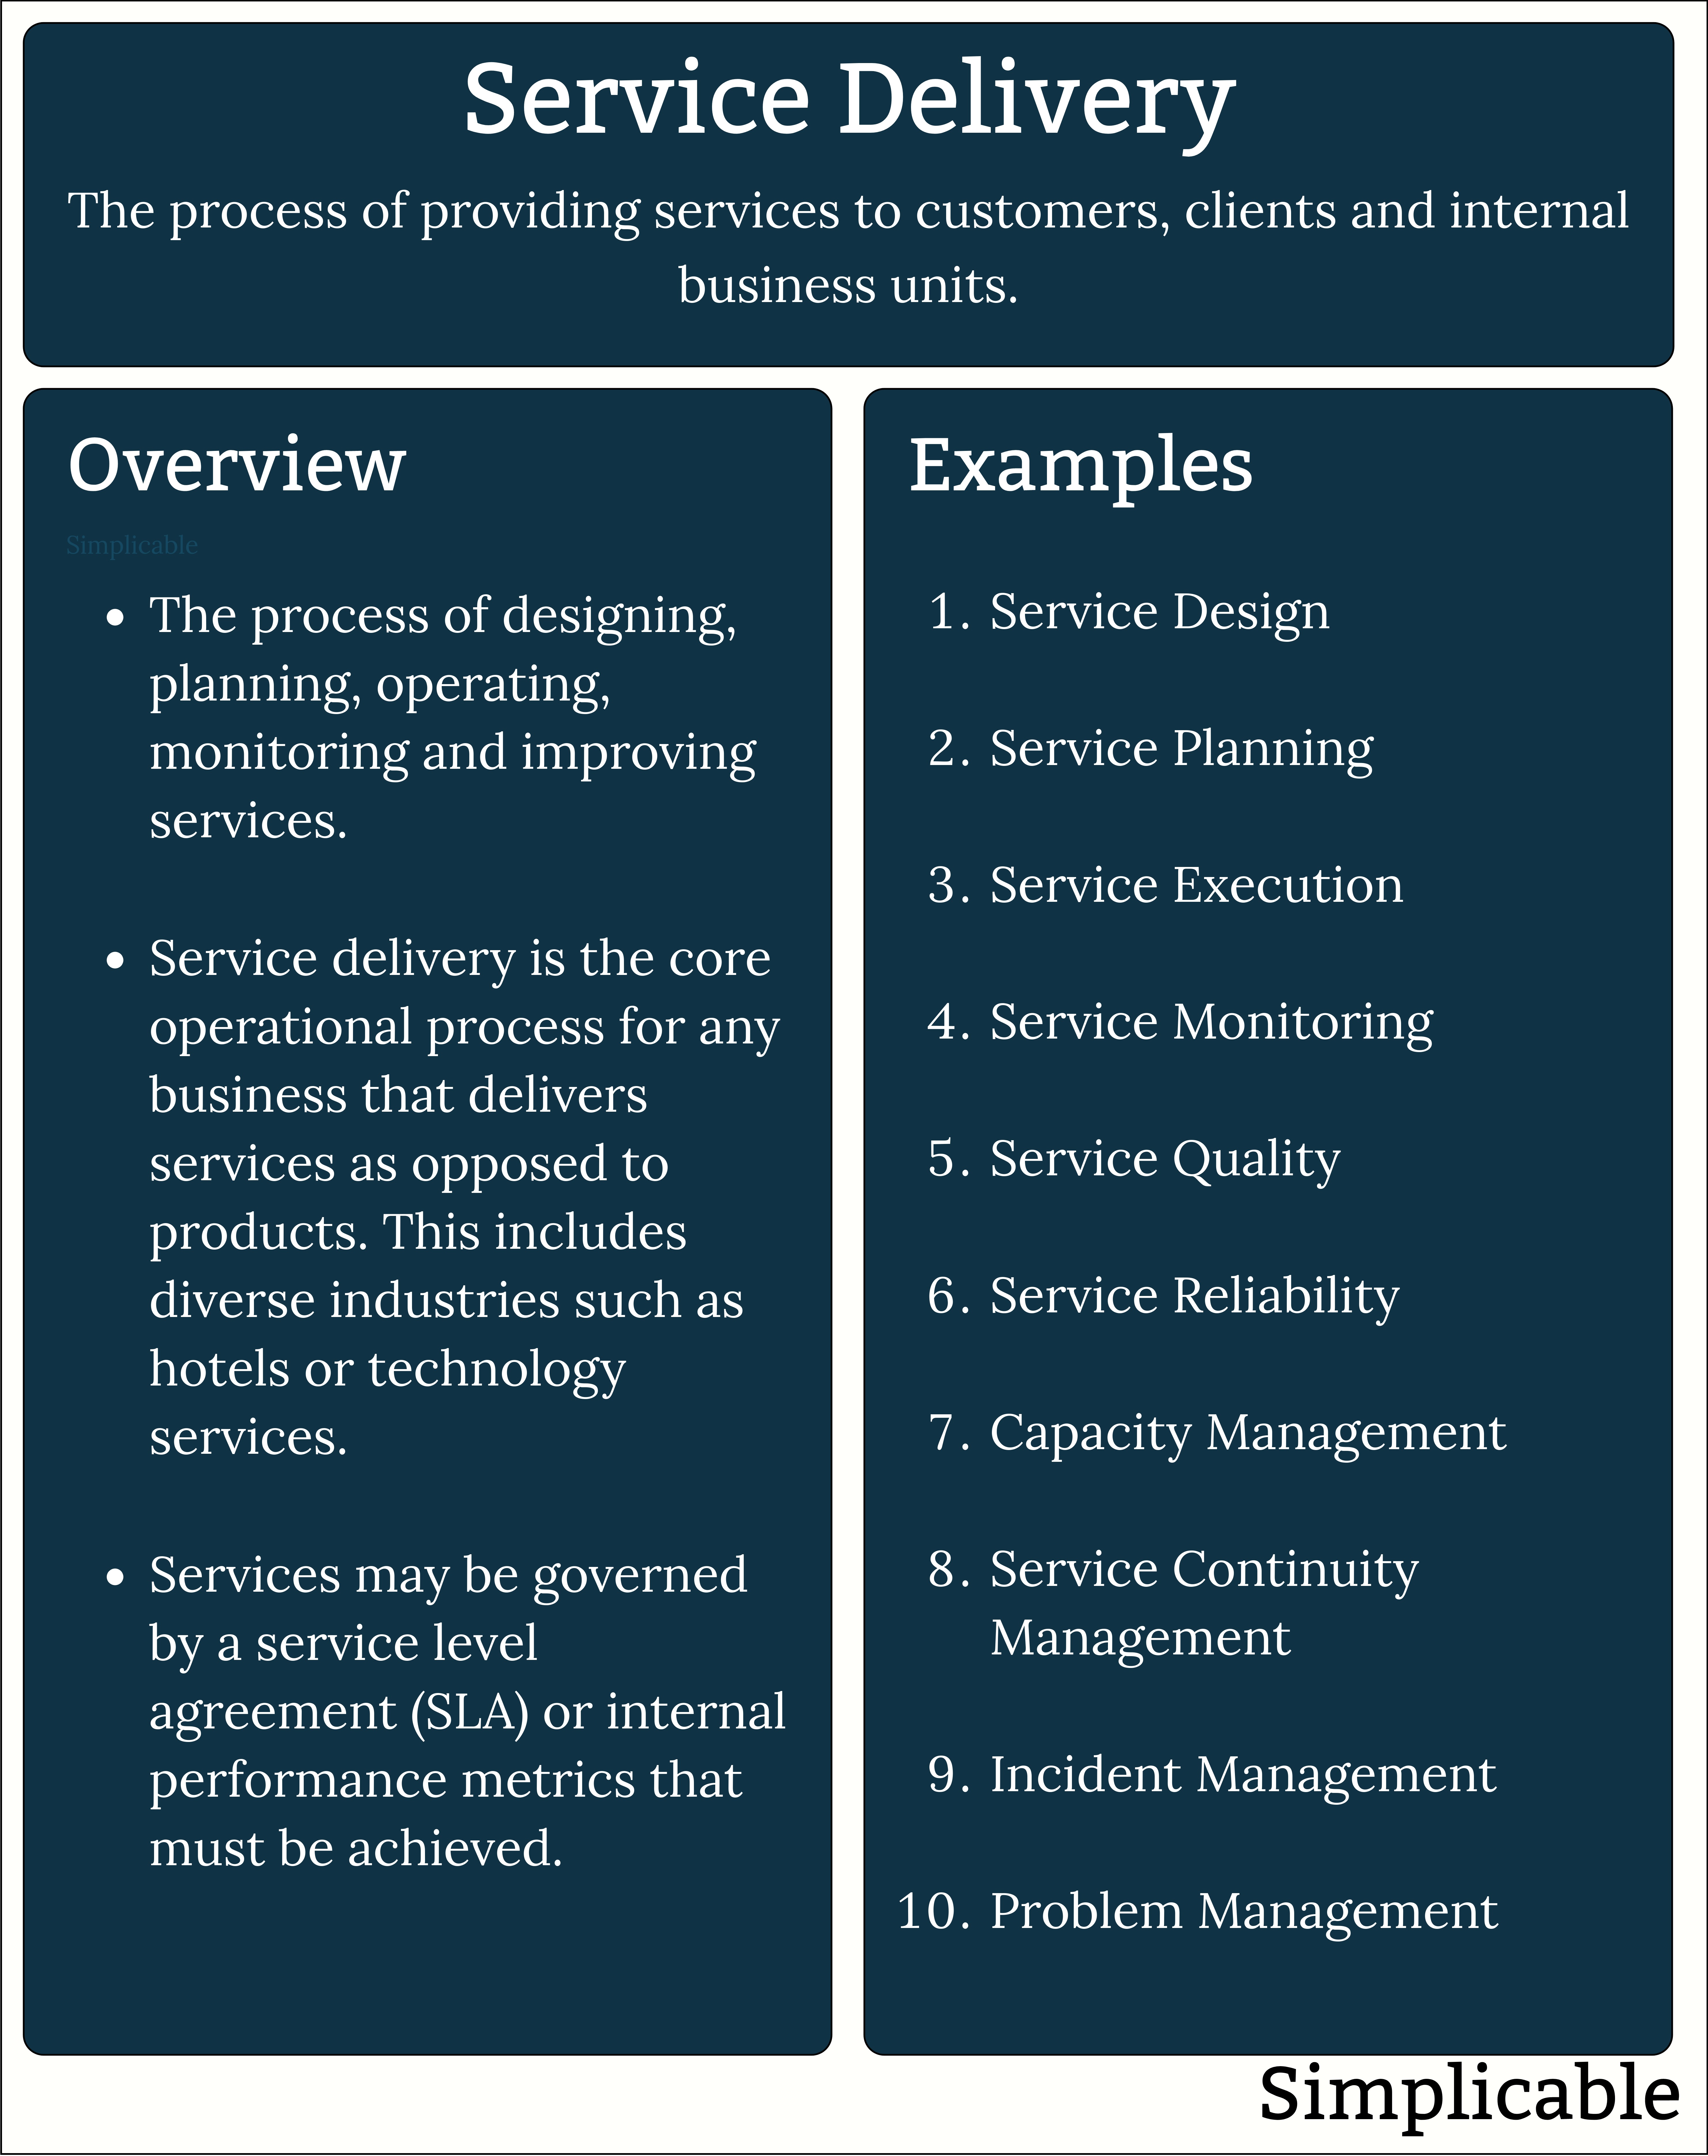 service delivery summary and examples